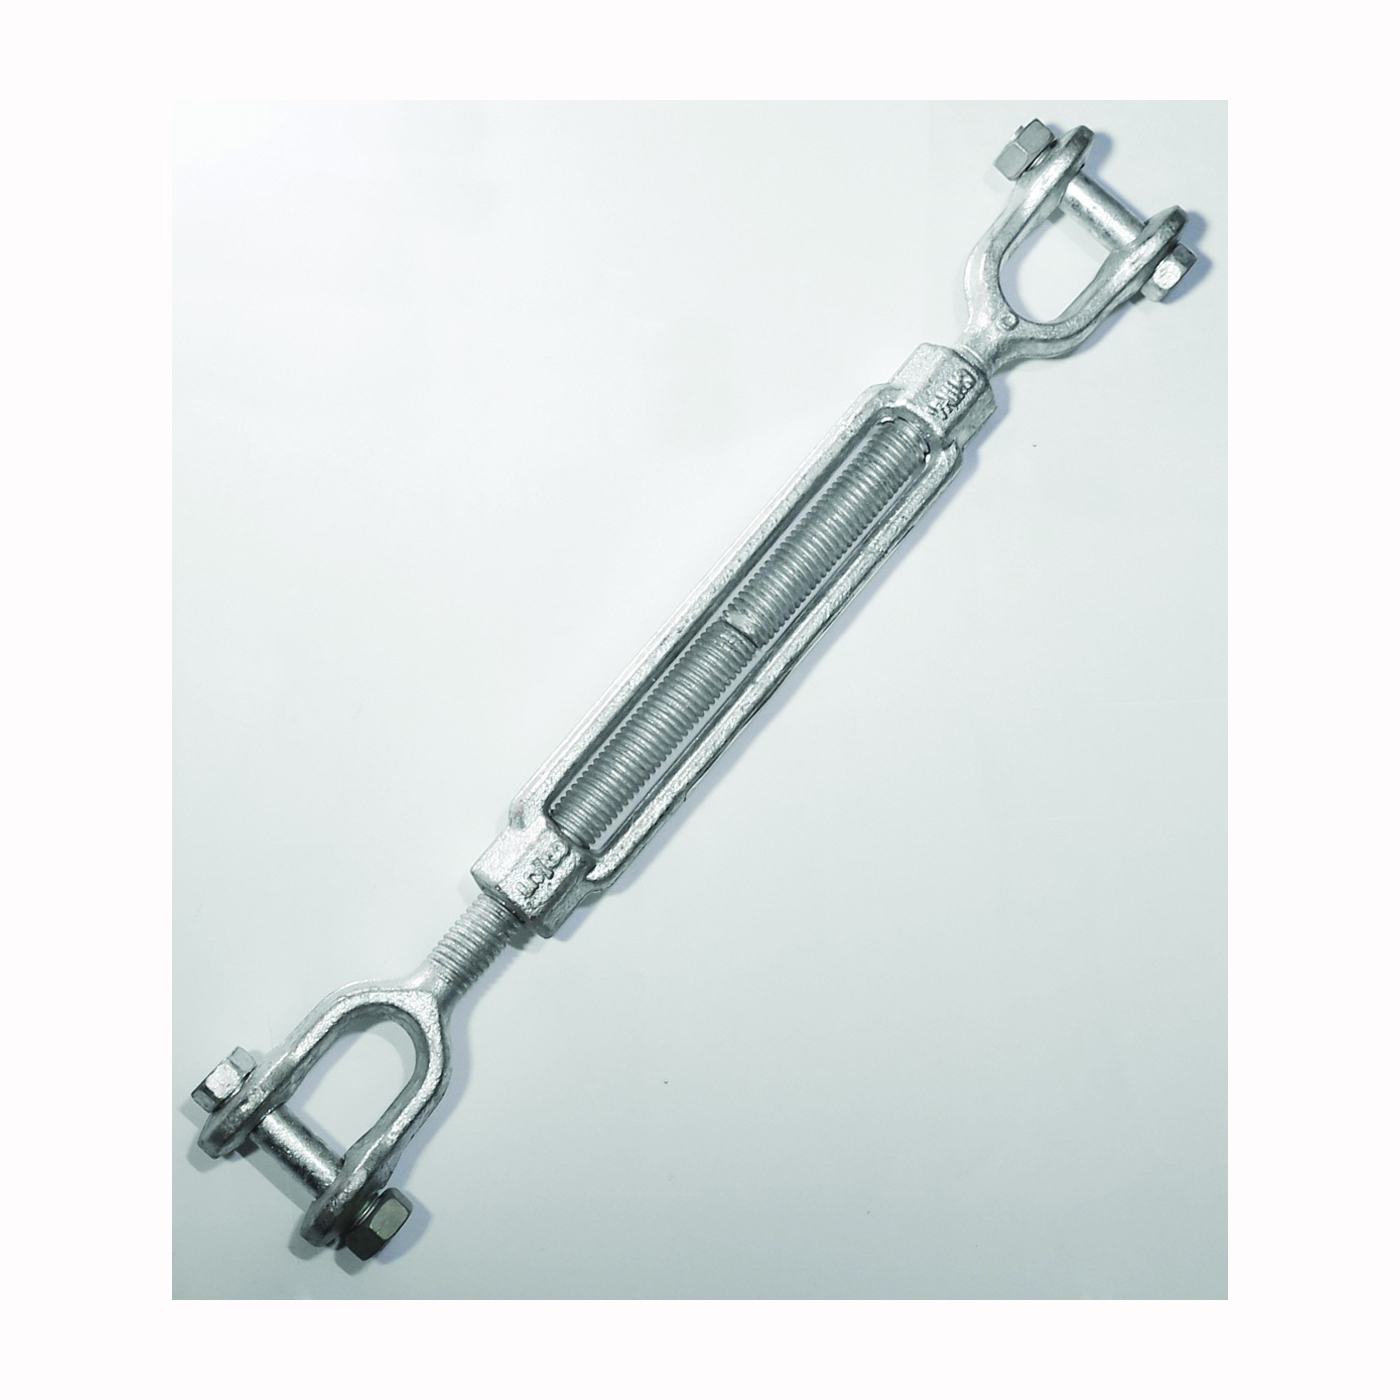 19-3/8X6 Turnbuckle, 1200 lb Working Load, 3/8 in Thread, Jaw, Jaw, 6 in L Take-Up, Galvanized Steel